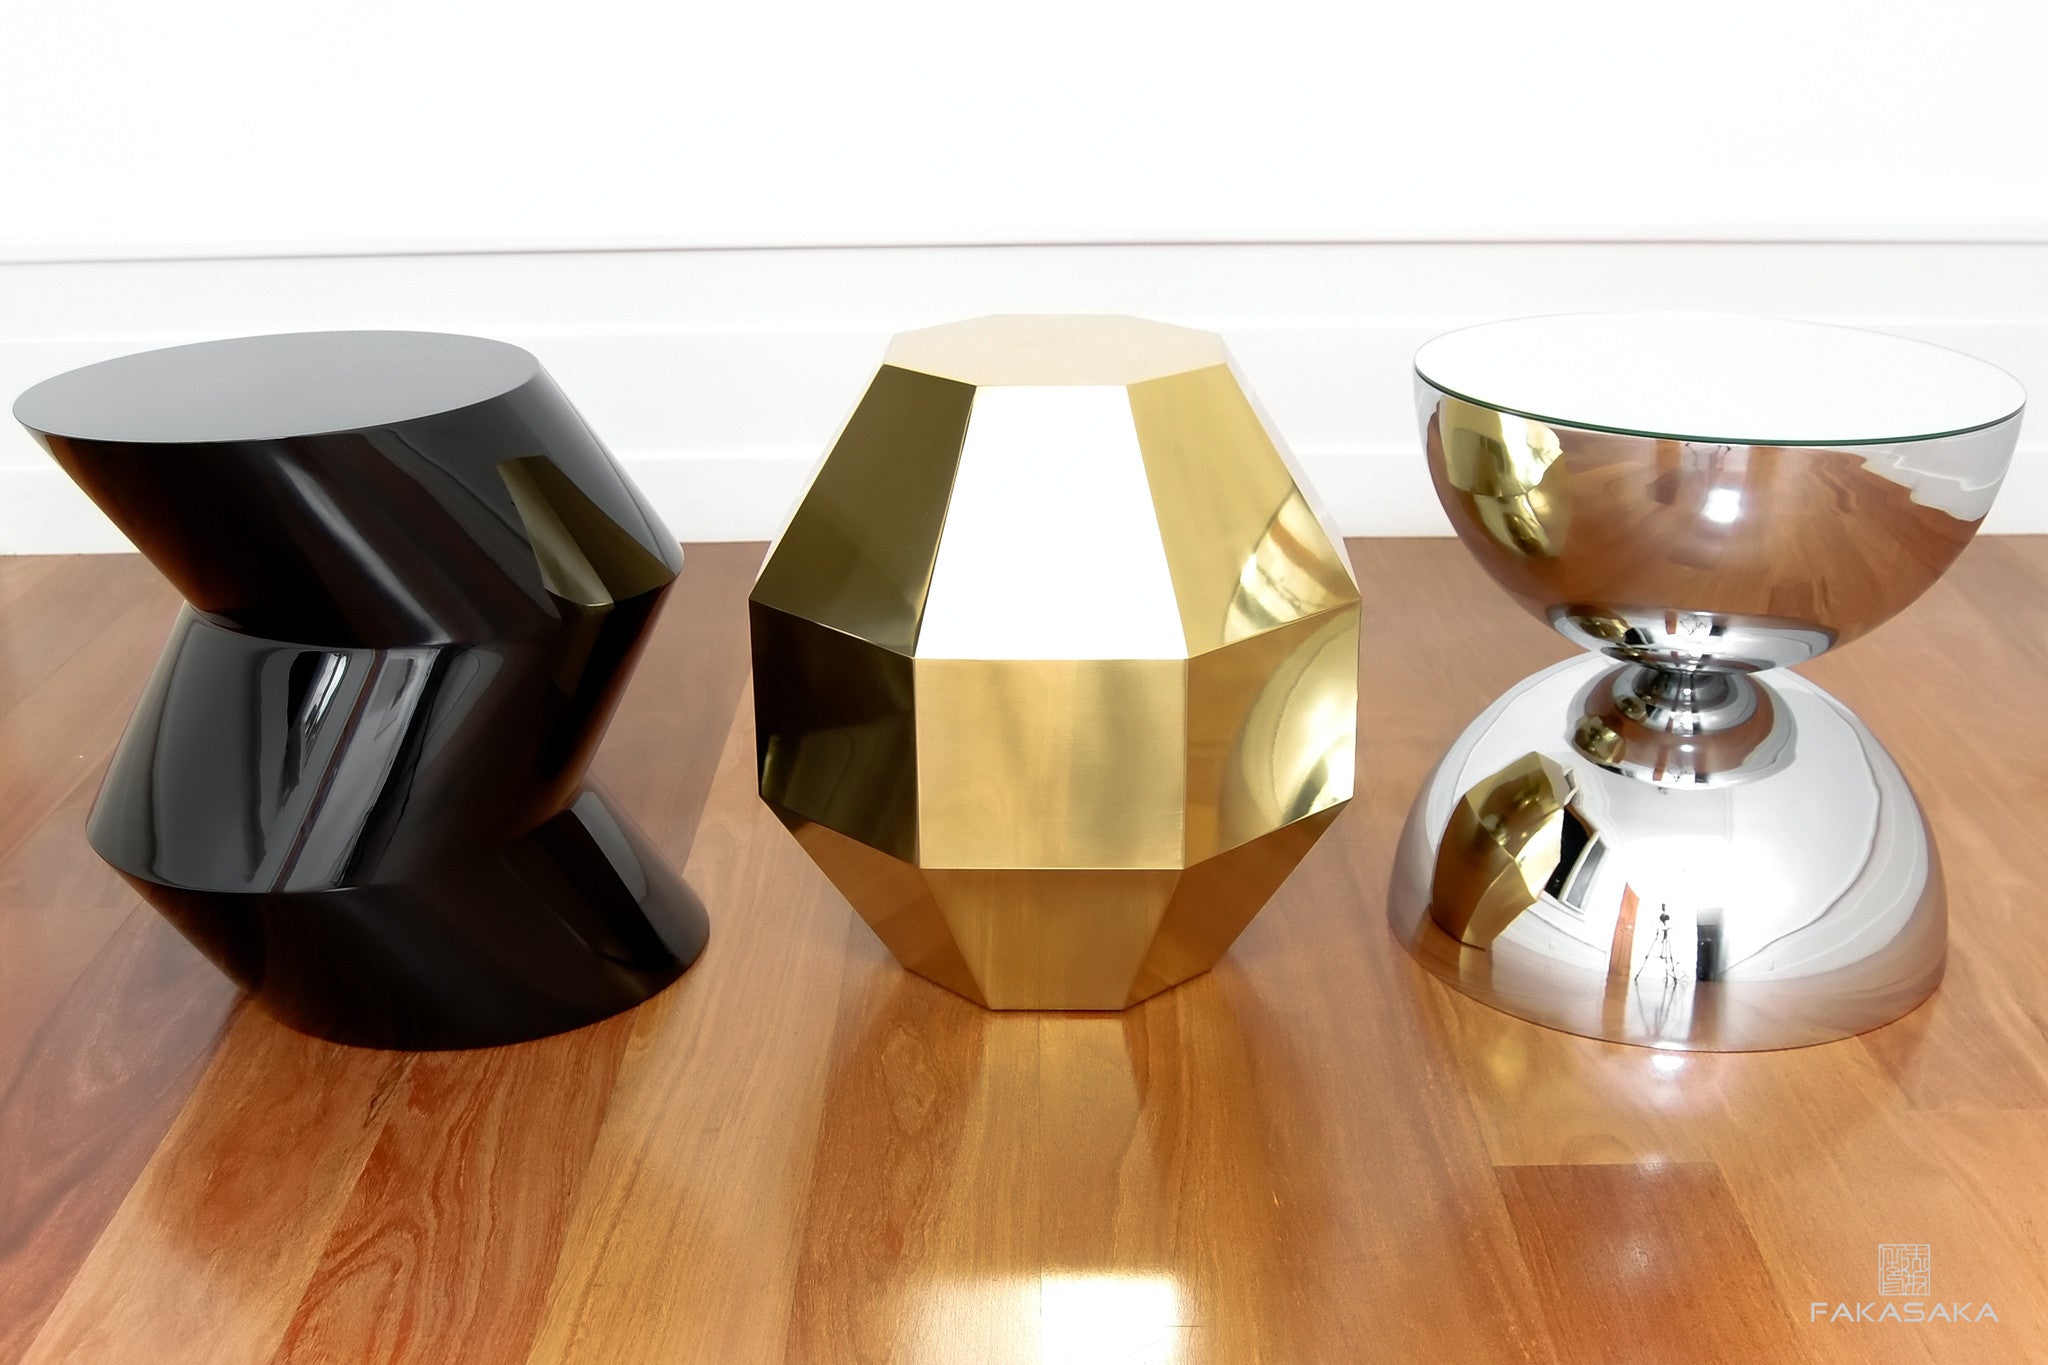 FA11 SIDE TABLE<br><br>MIRROR ON TOP<br>CHROMED